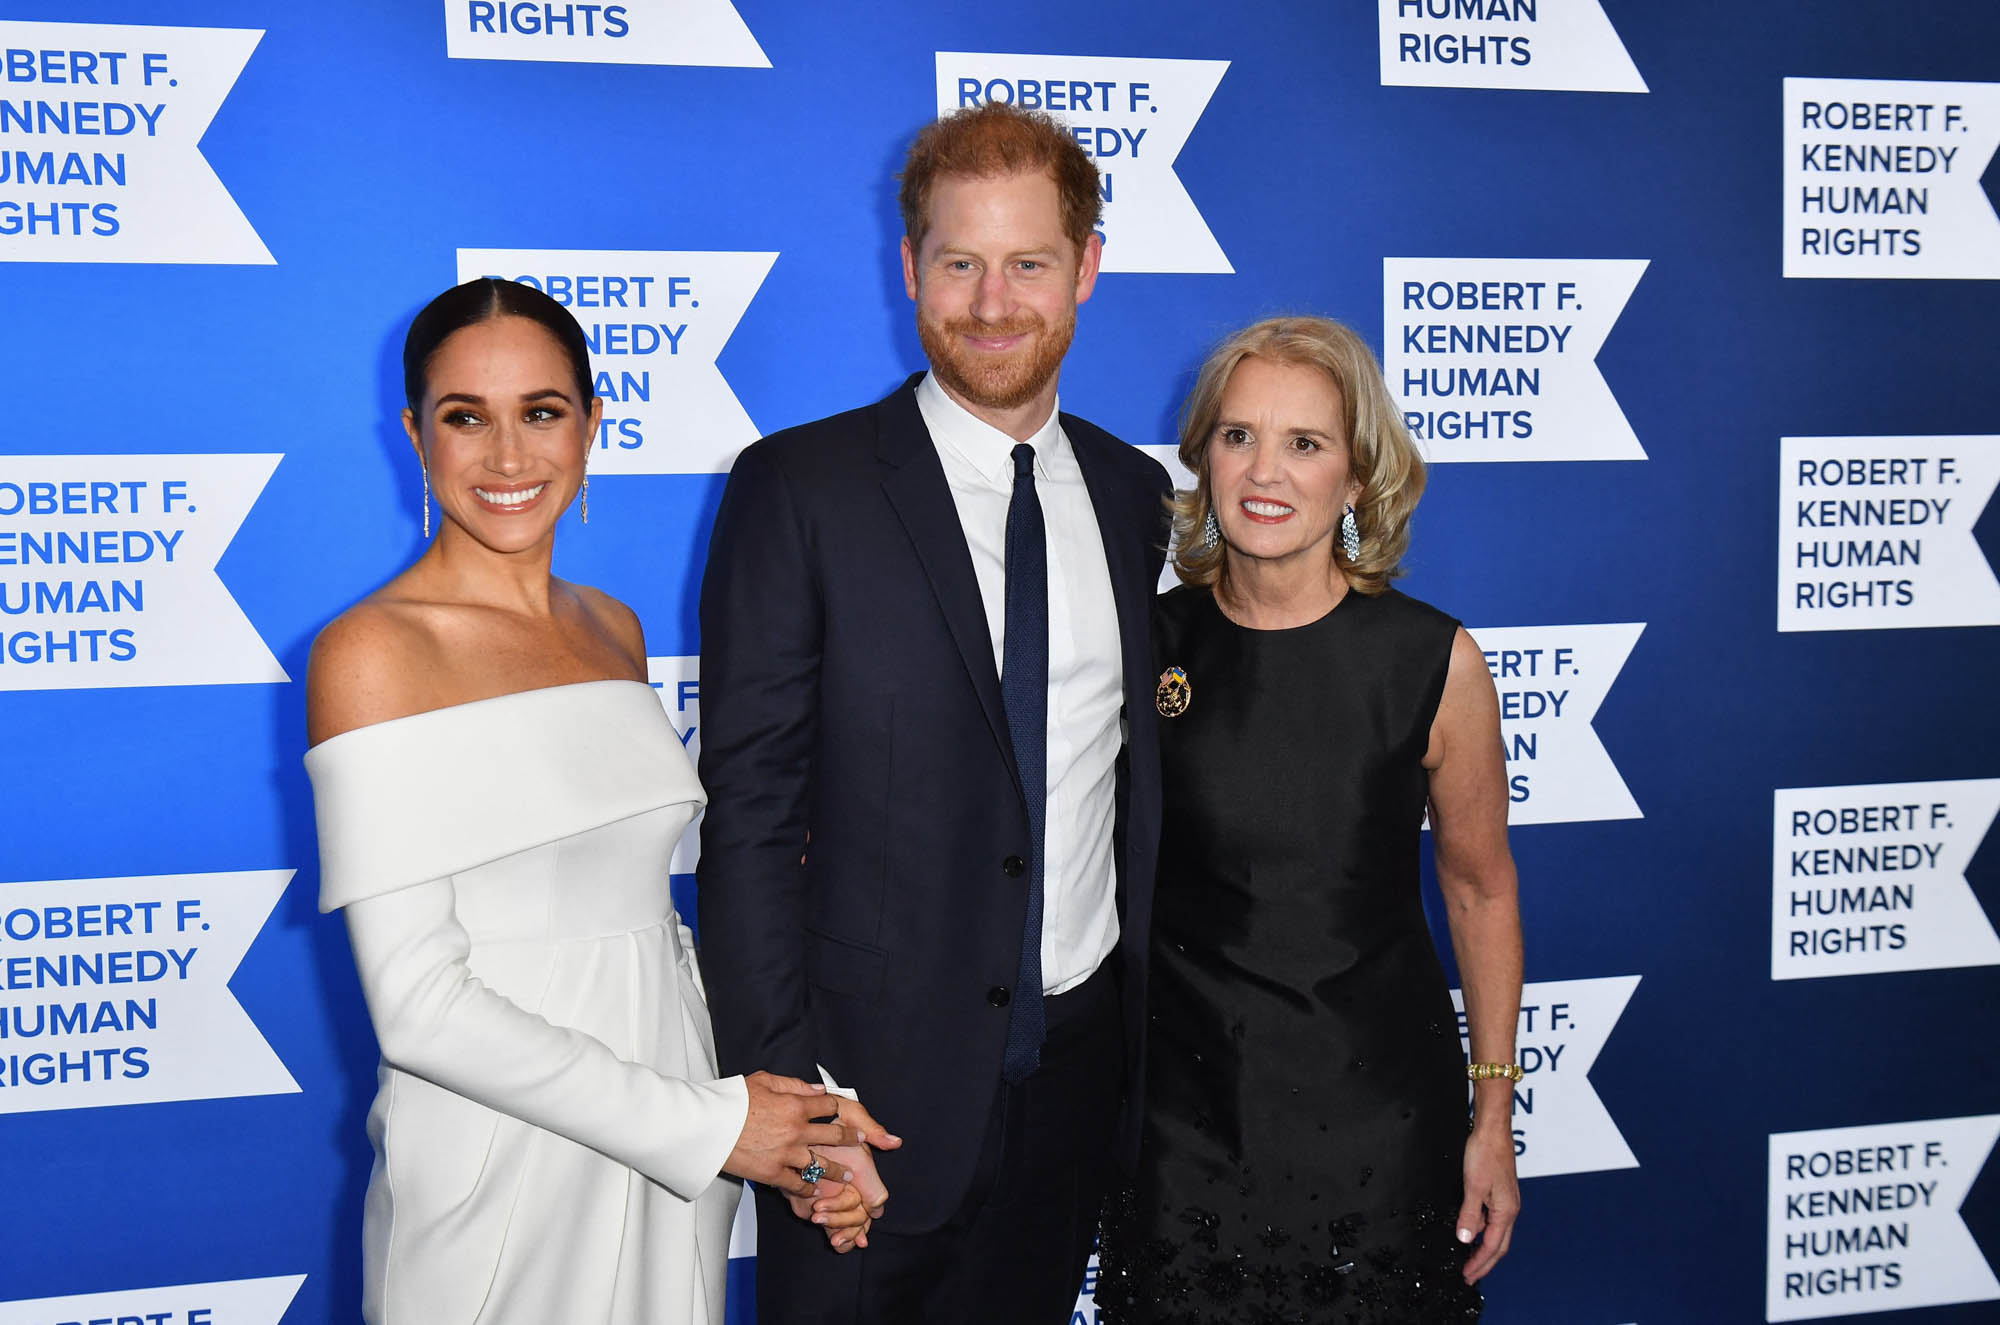 Robert F Kennedy Ripple Of Hope Award Photos and Premium High Res Pictures - Getty Images